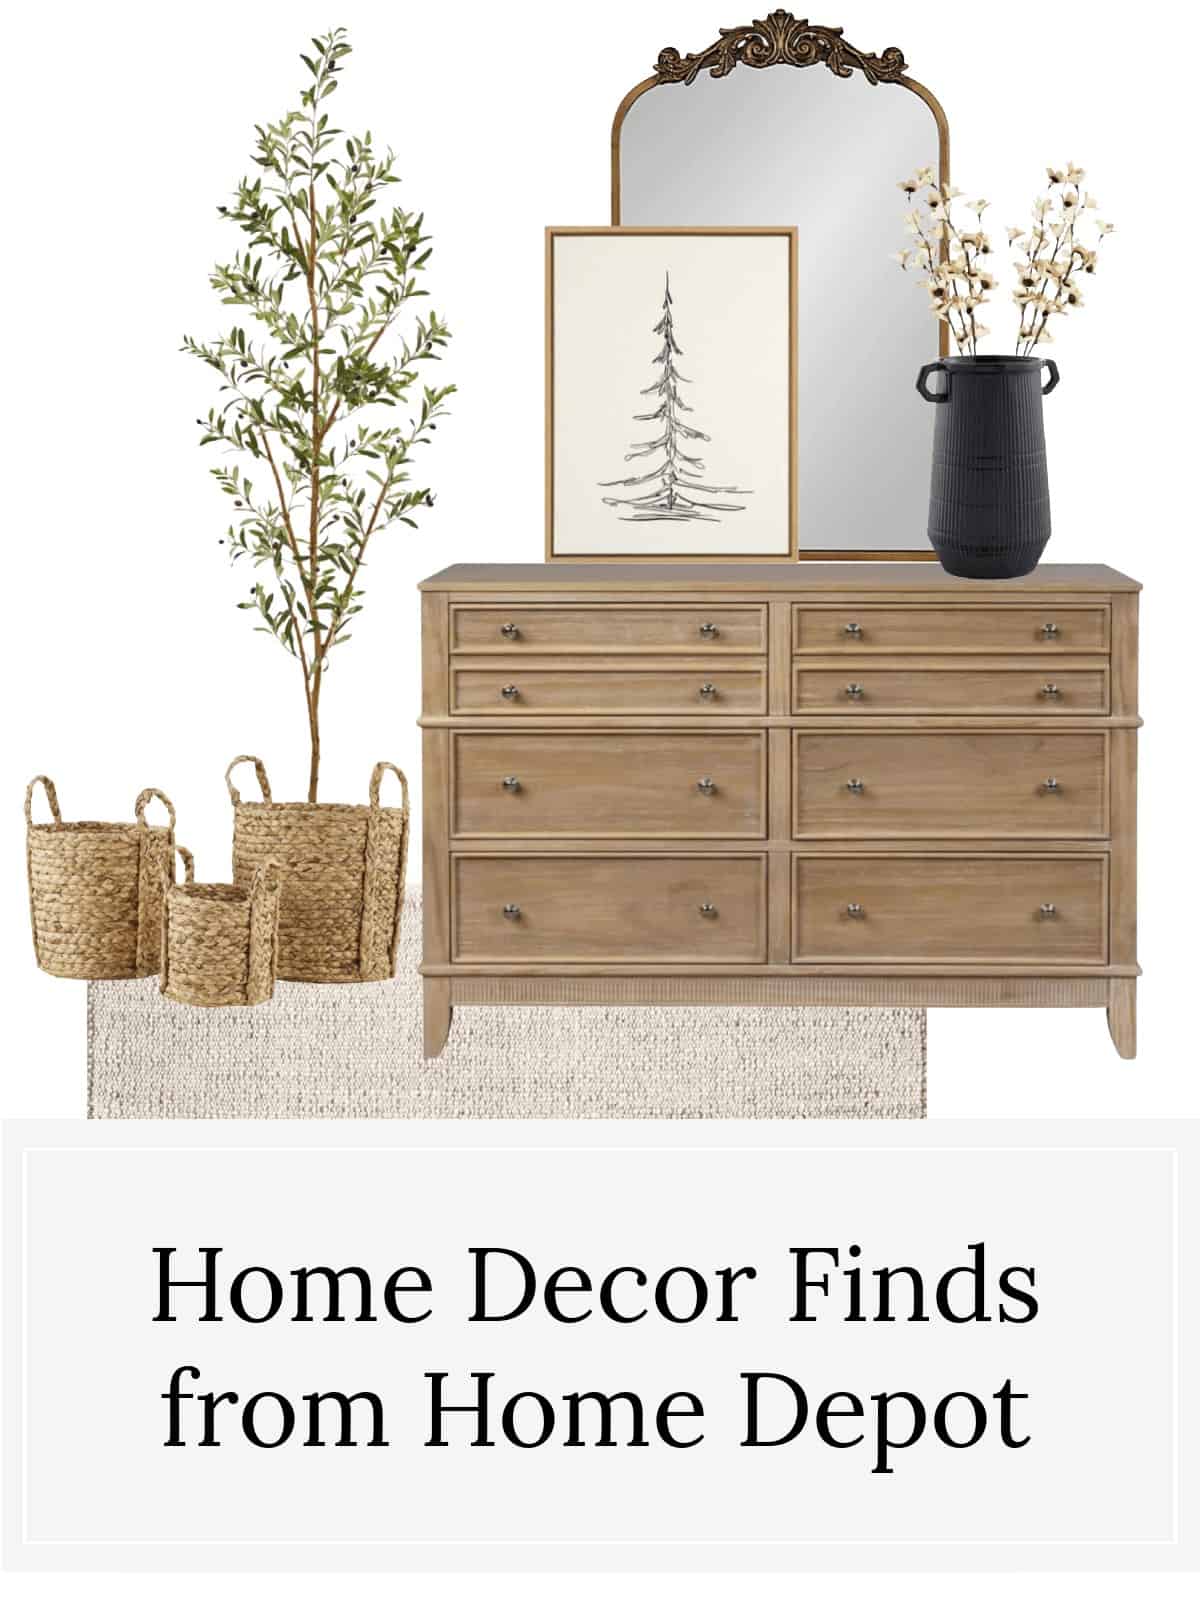 Home Decor Finds from Home Depot